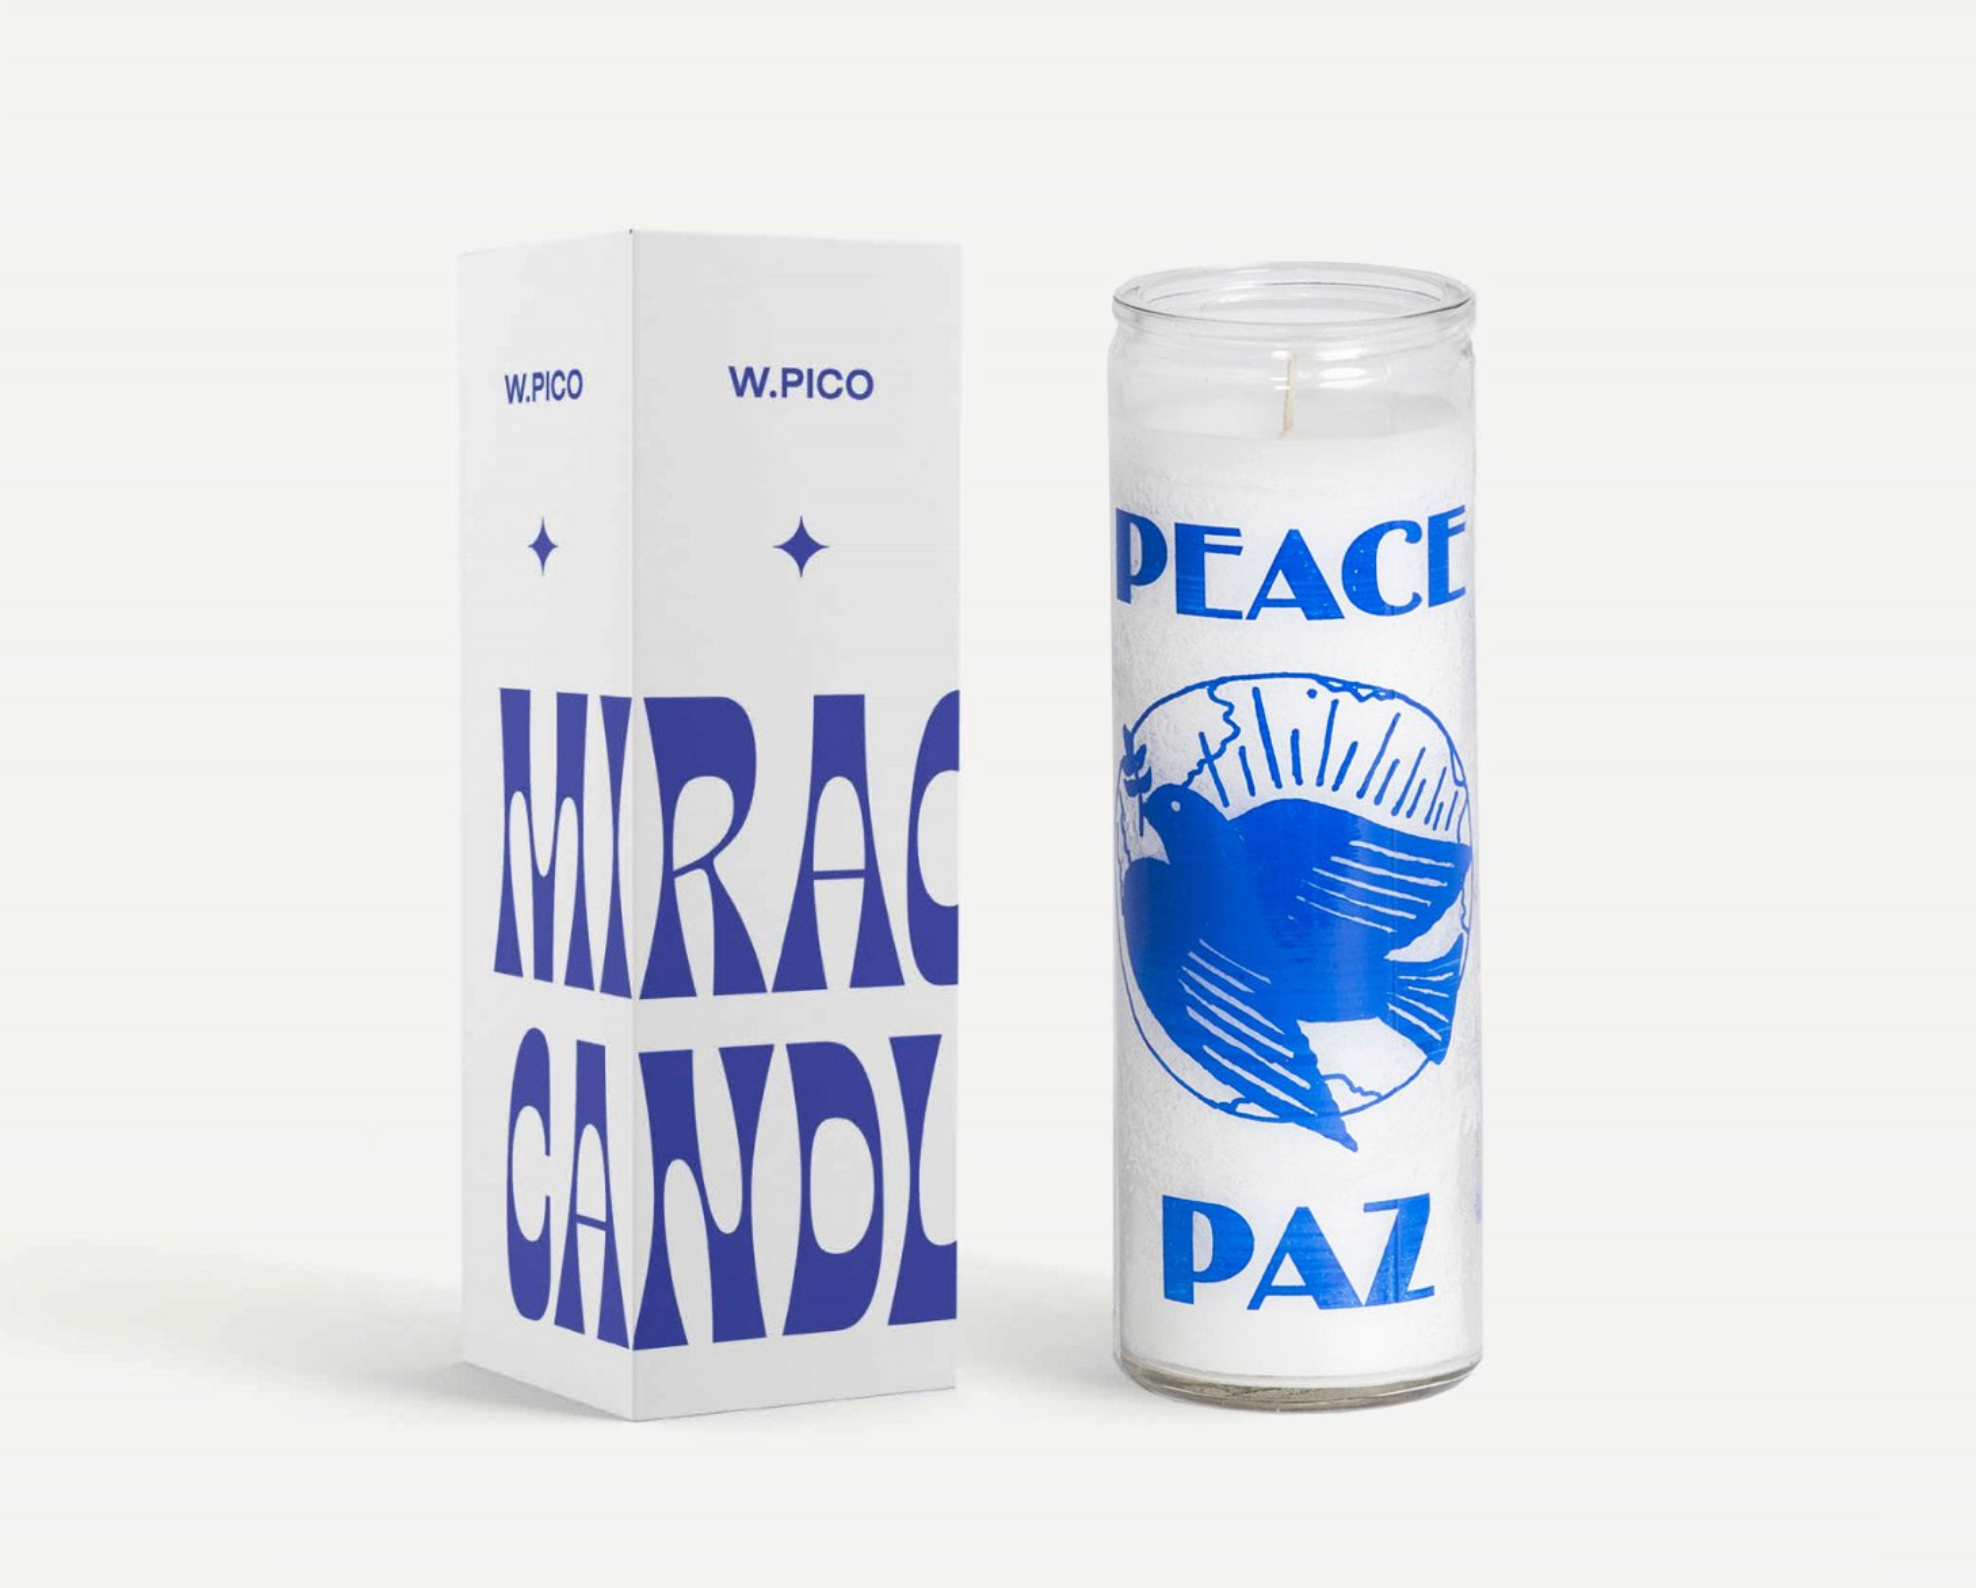 W.PICO MIRACLE CANDLE - Peace